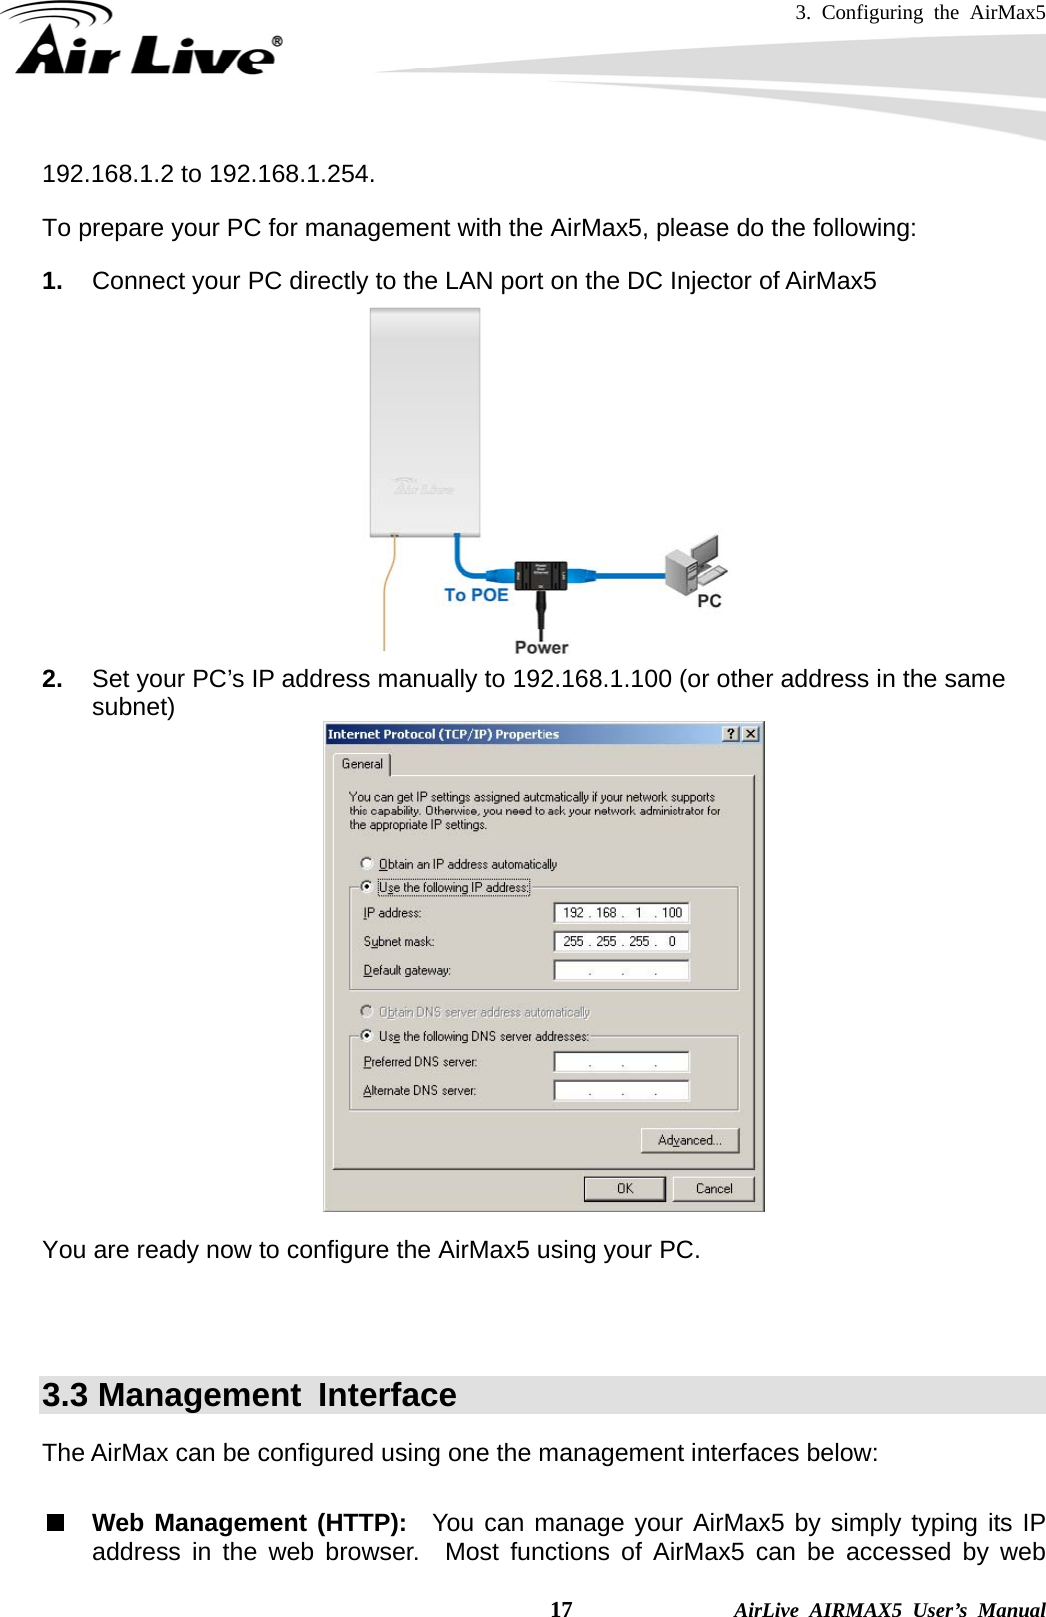 3. Configuring the AirMax5    17              AirLive AIRMAX5 User’s Manual 192.168.1.2 to 192.168.1.254.   To prepare your PC for management with the AirMax5, please do the following: 1.  Connect your PC directly to the LAN port on the DC Injector of AirMax5  2.  Set your PC’s IP address manually to 192.168.1.100 (or other address in the same subnet)   You are ready now to configure the AirMax5 using your PC.        3.3 Management  Interface The AirMax can be configured using one the management interfaces below:  Web Management (HTTP):  You can manage your AirMax5 by simply typing its IP address in the web browser.  Most functions of AirMax5 can be accessed by web 